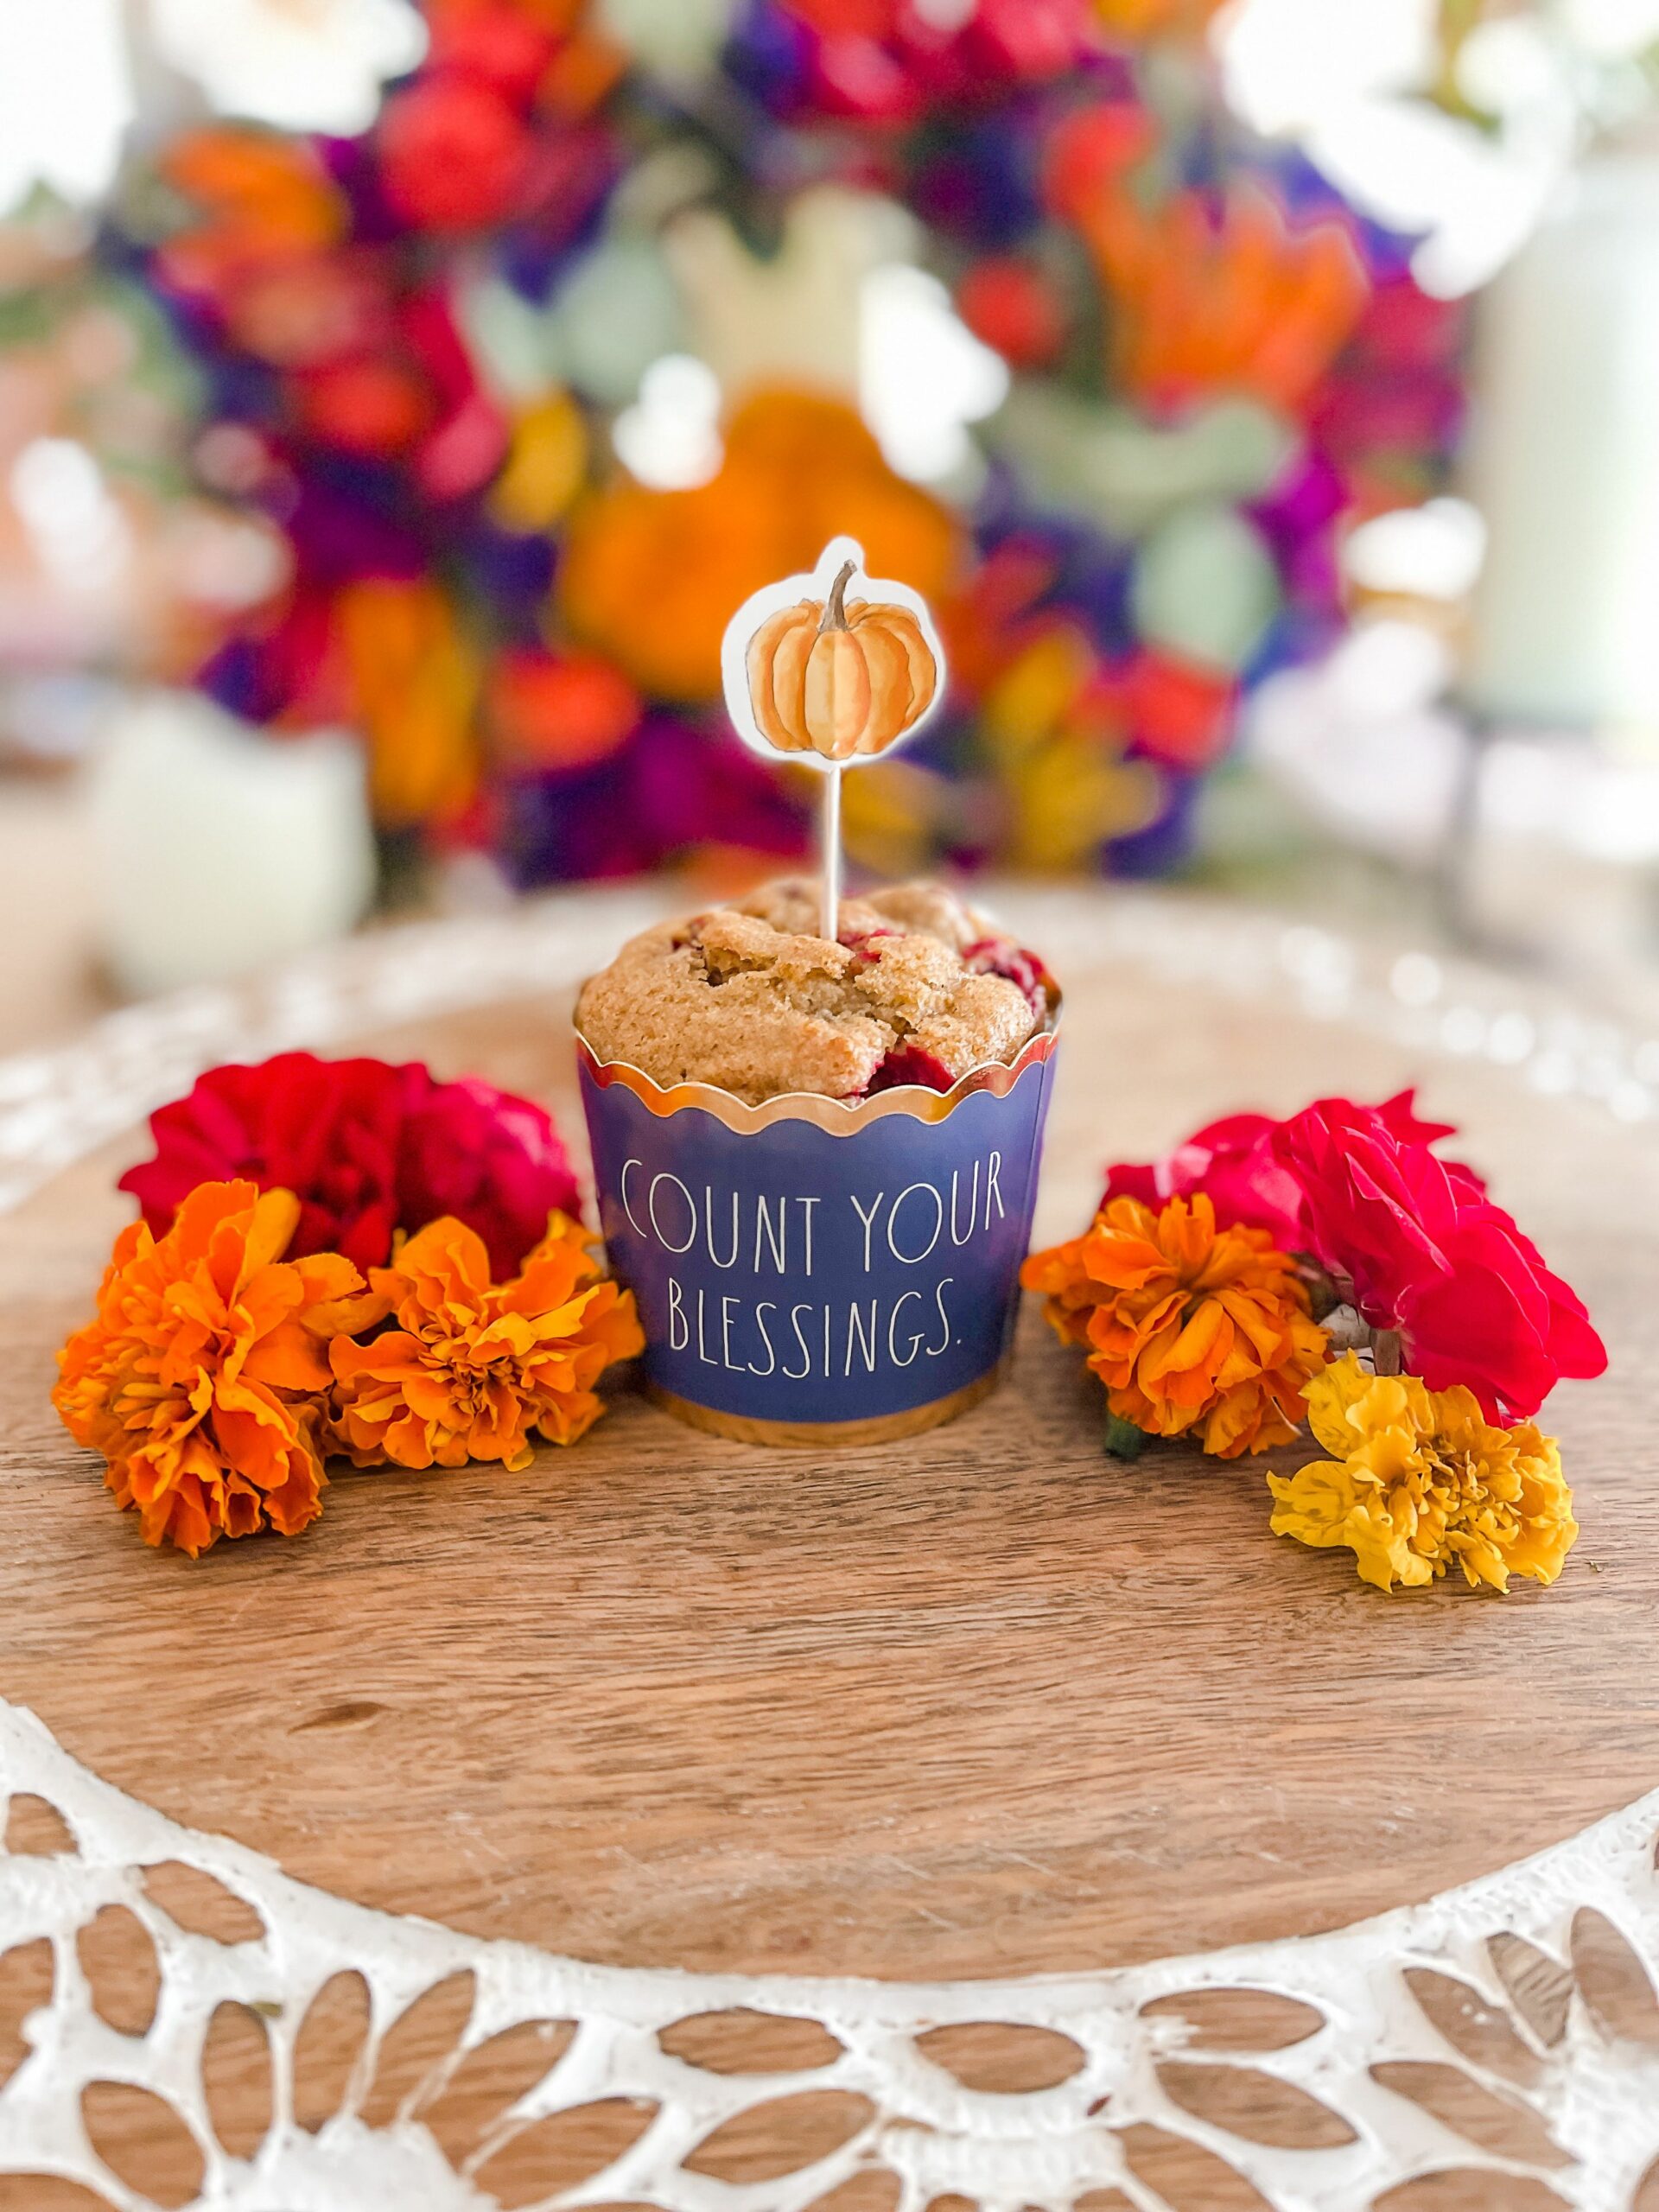 Count your blessings muffin with flowers.